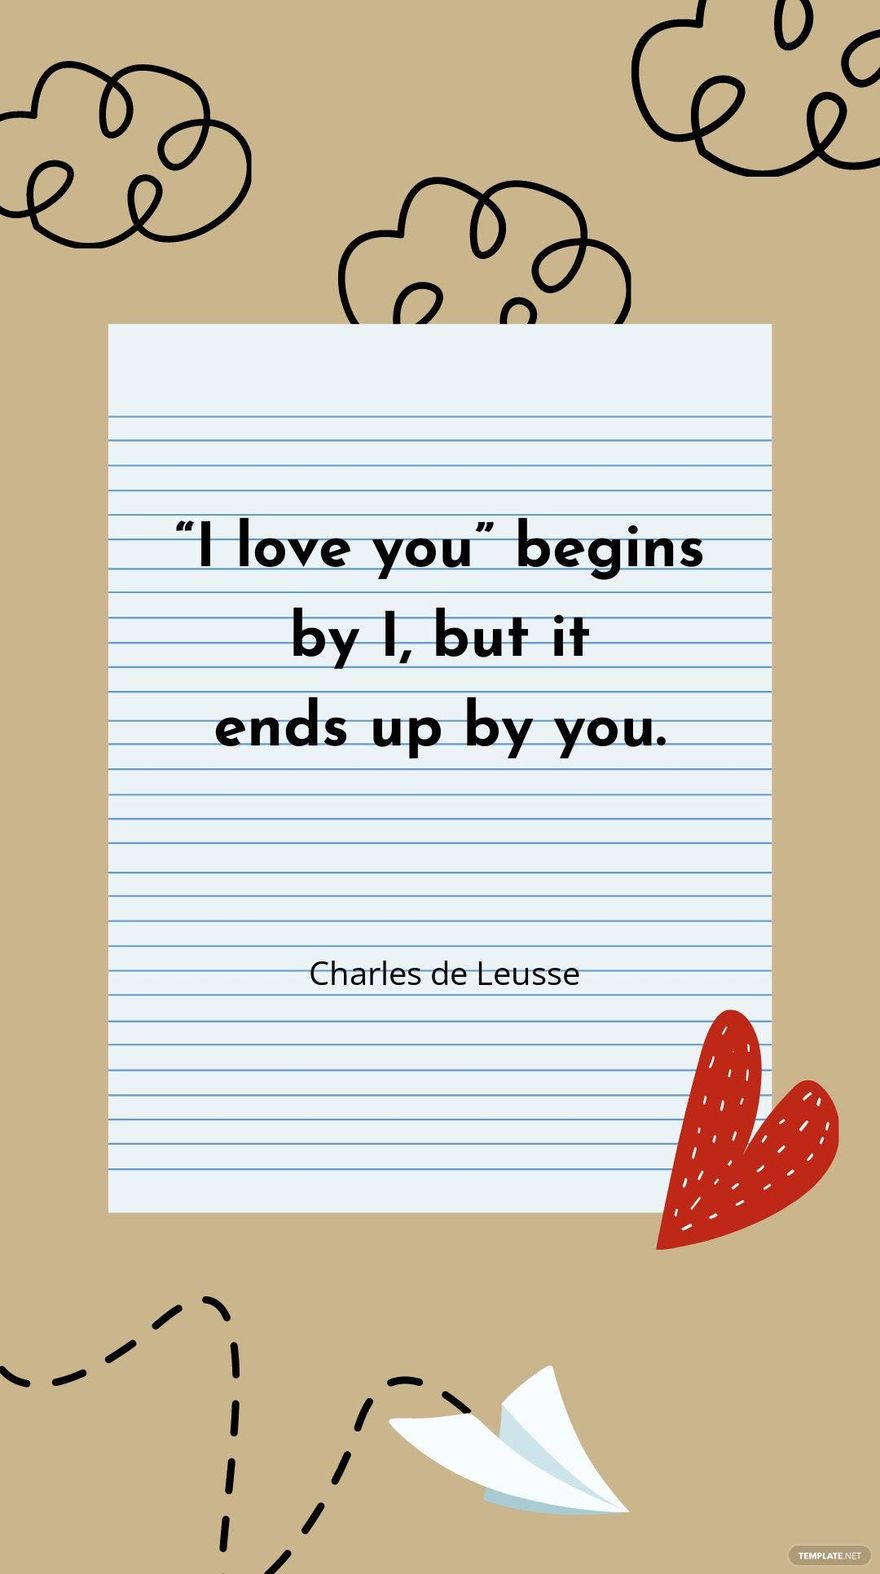 Charles de Leusse - “I love you” begins by I, but it ends up by you.